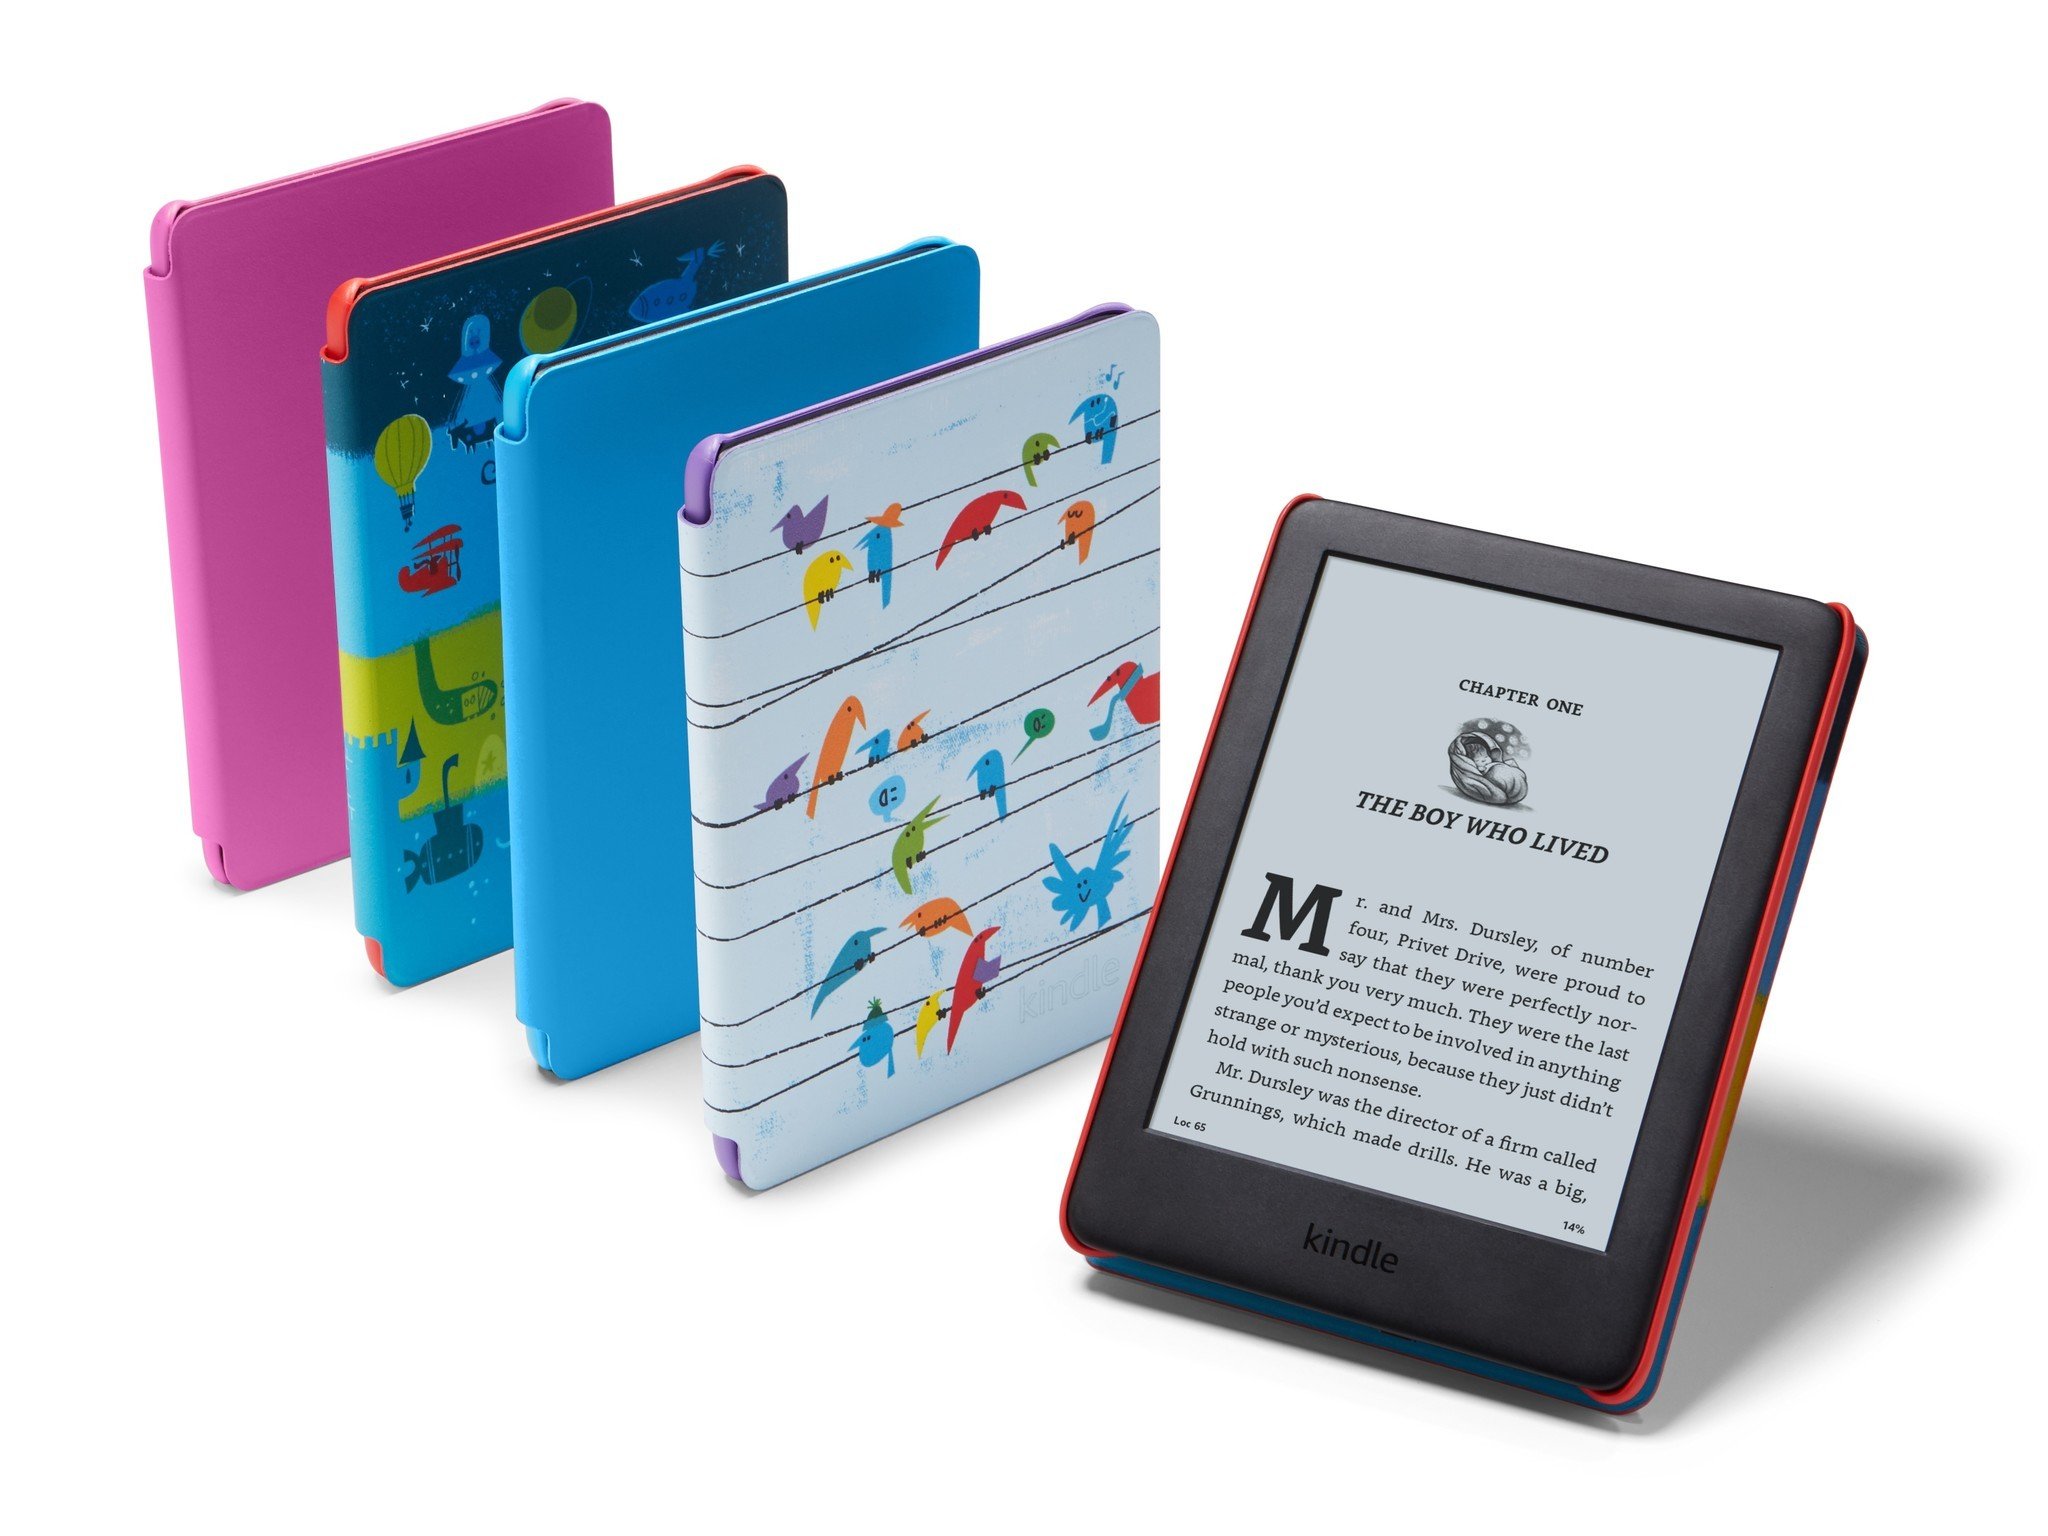 Amazon announces its first-ever Kindle for kids